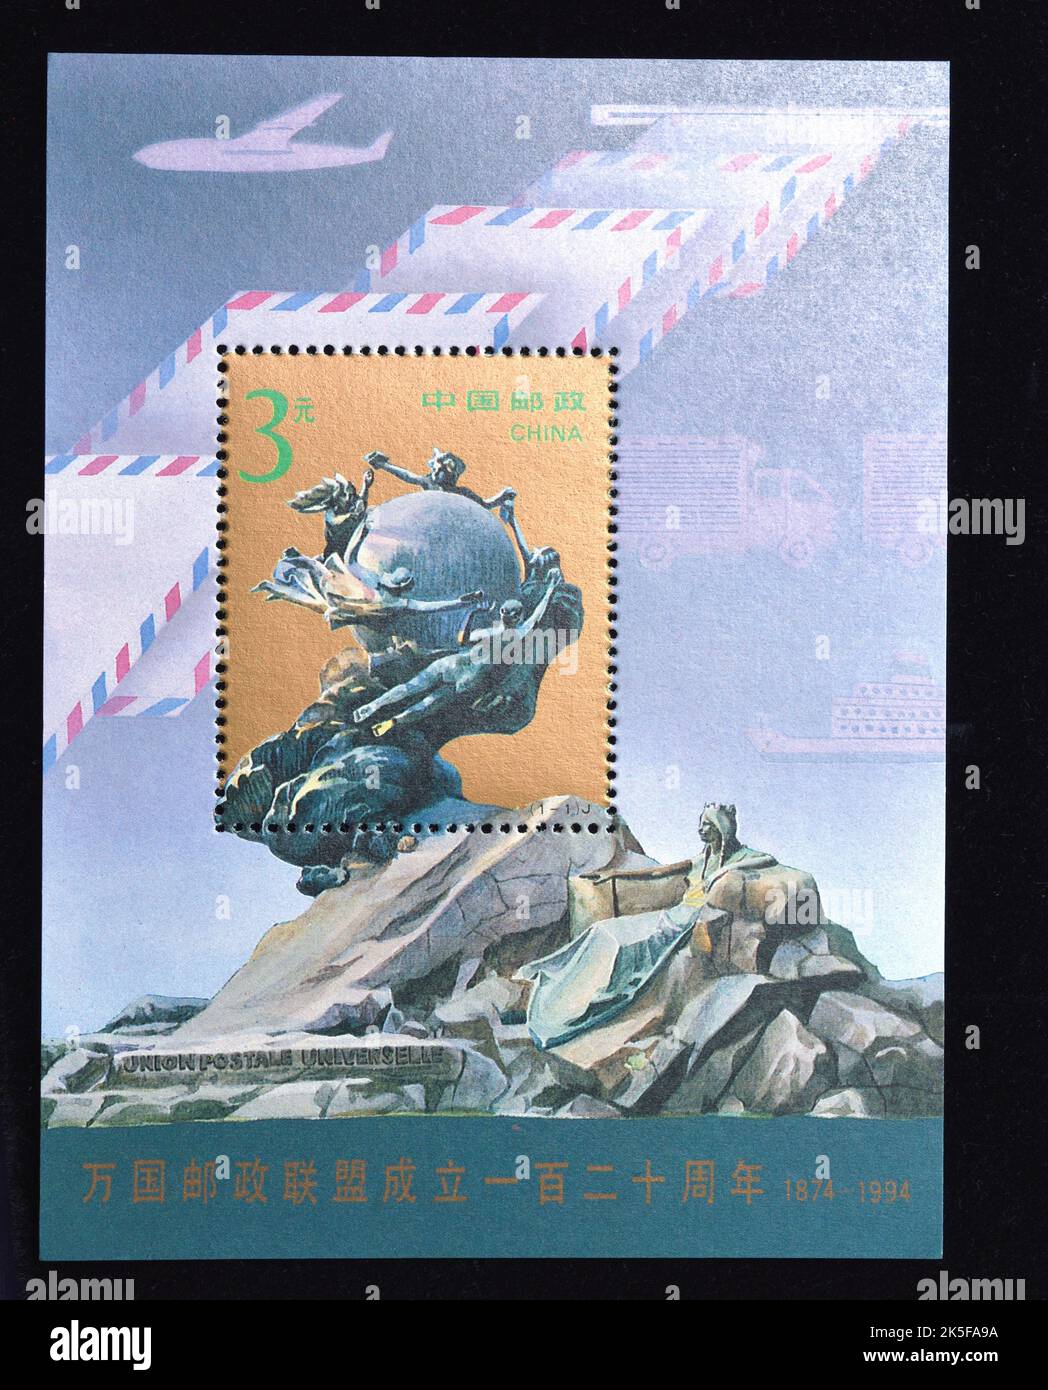 CHINA - CIRCA 1994: A stamp printed in China shows 1994-16, Scott 2530 120th Anniversary Of the Founding of the Universal Postal Union 1874-1994 , cir Stock Photo